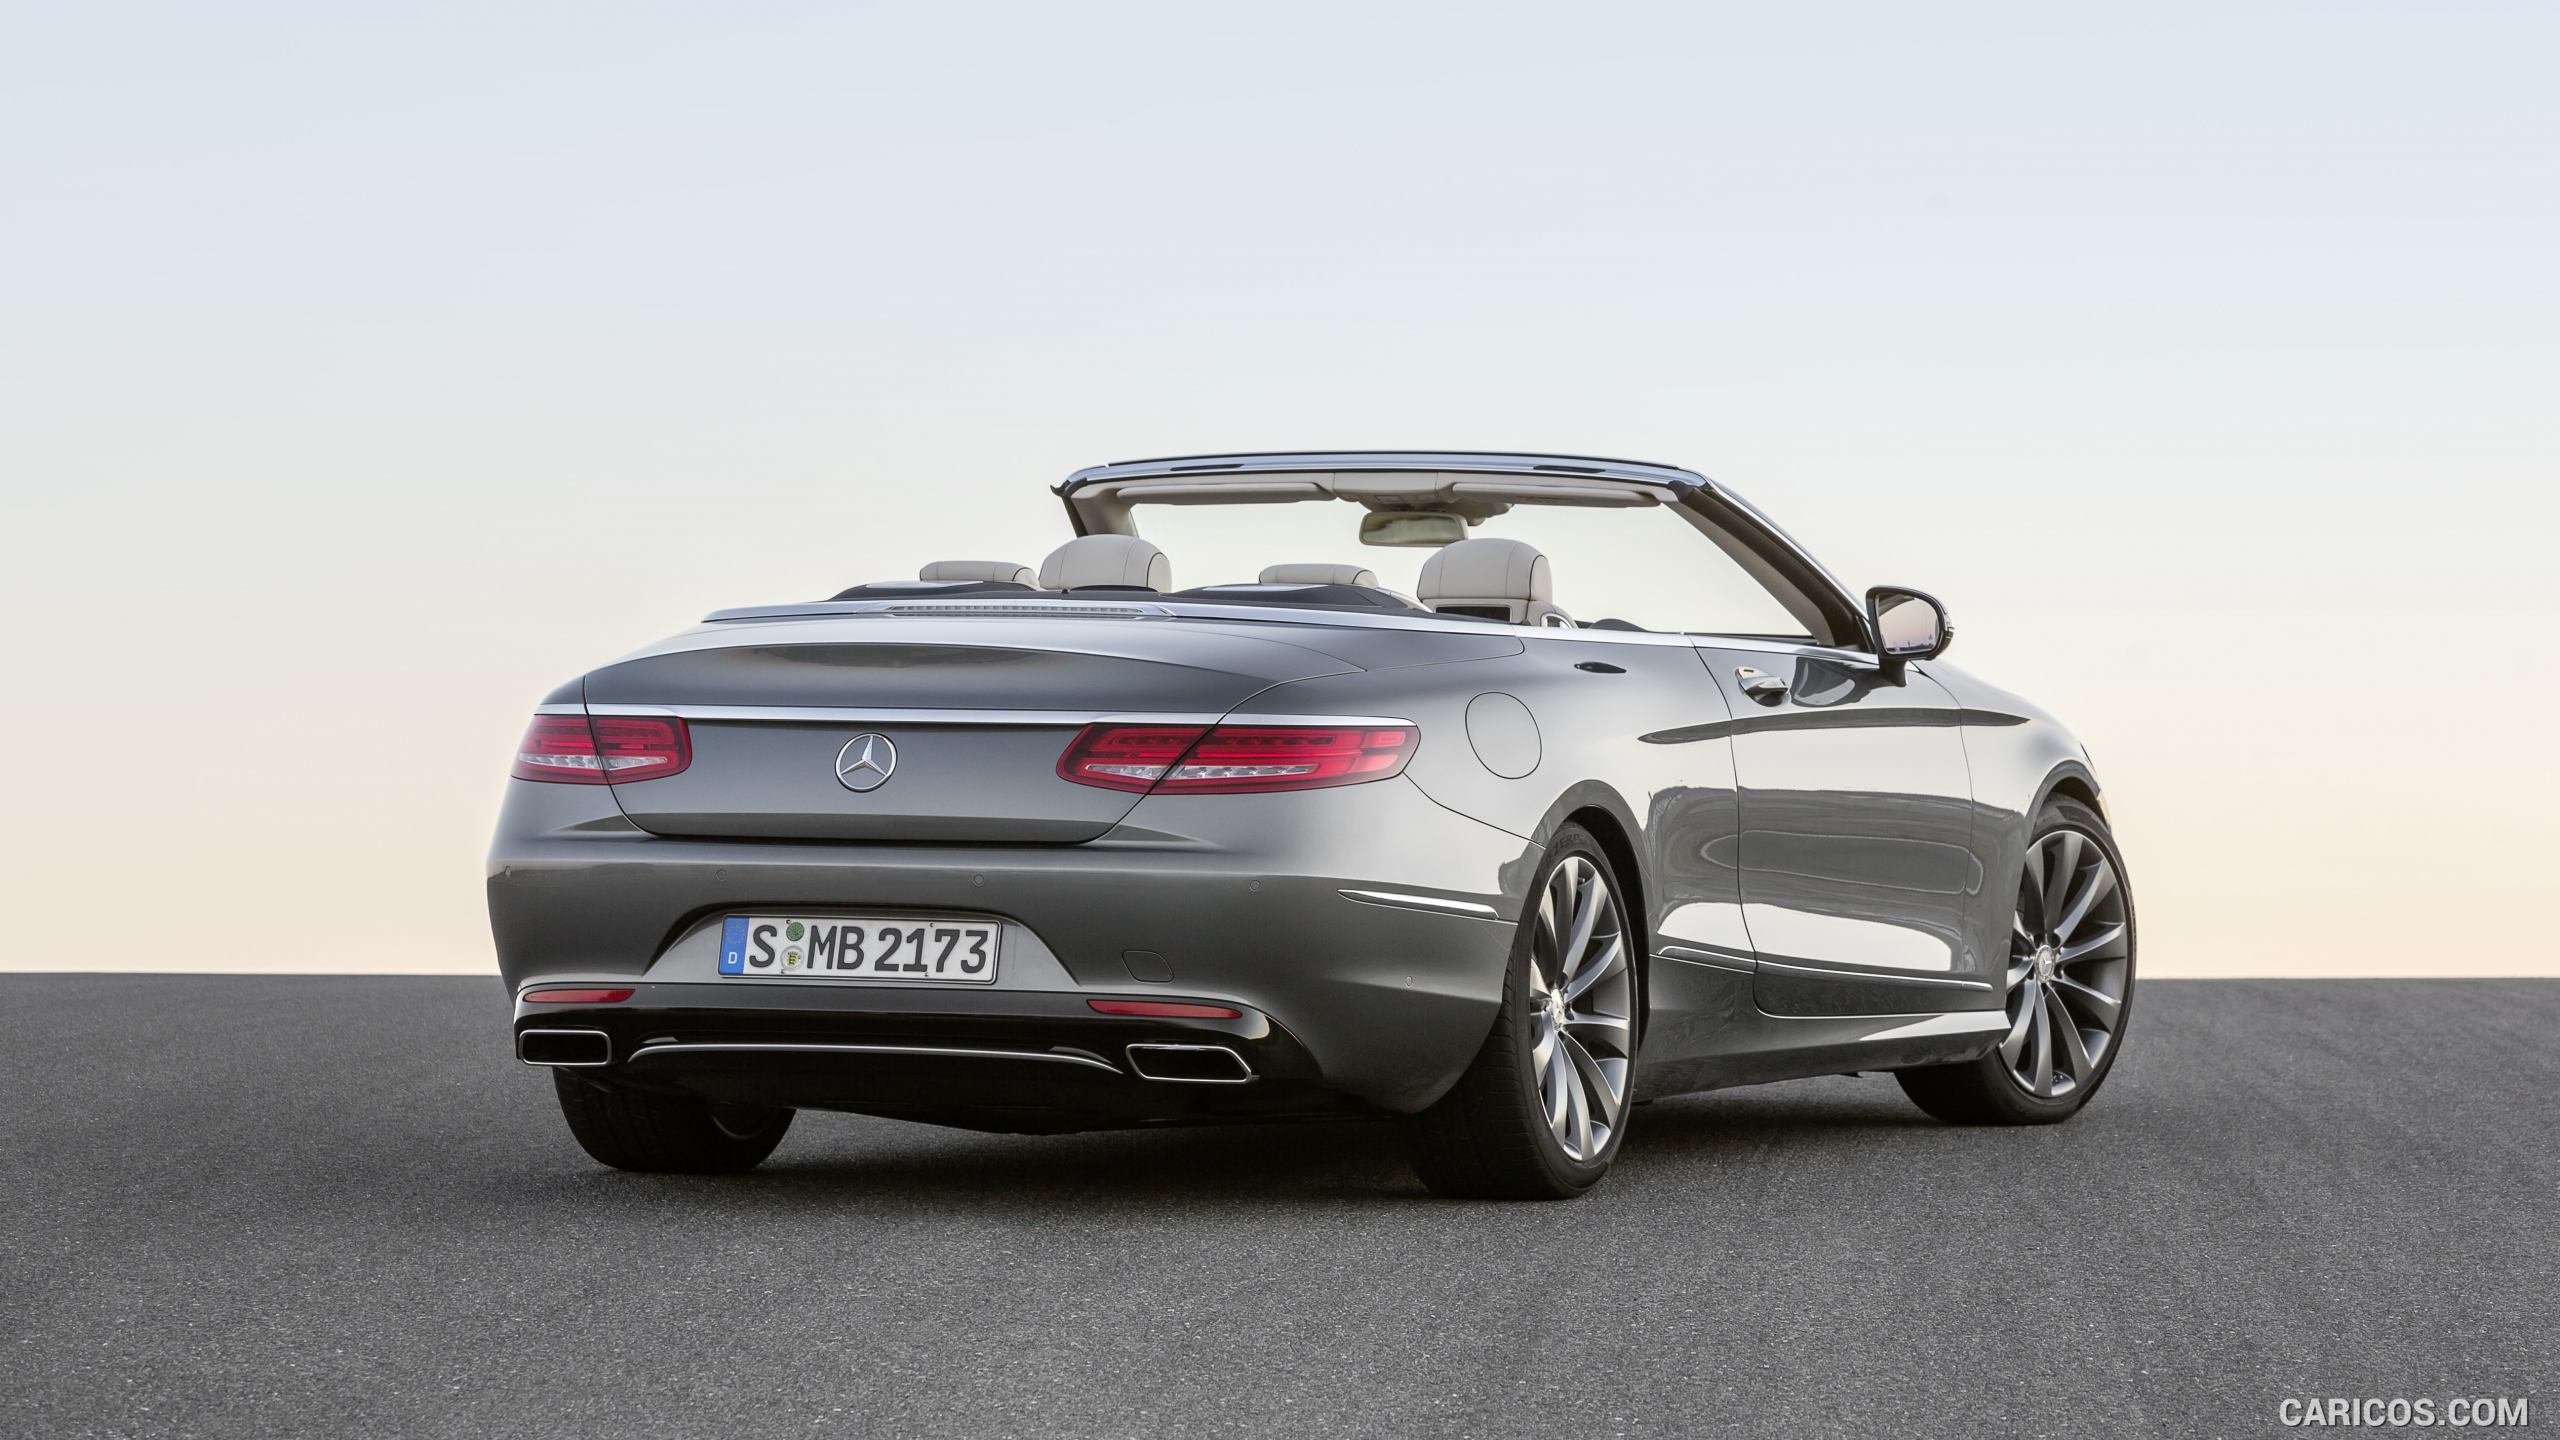 2017 Mercedes-Benz S-Class S500 Cabriolet (Selenit Grey) - Rear, #16 of 56